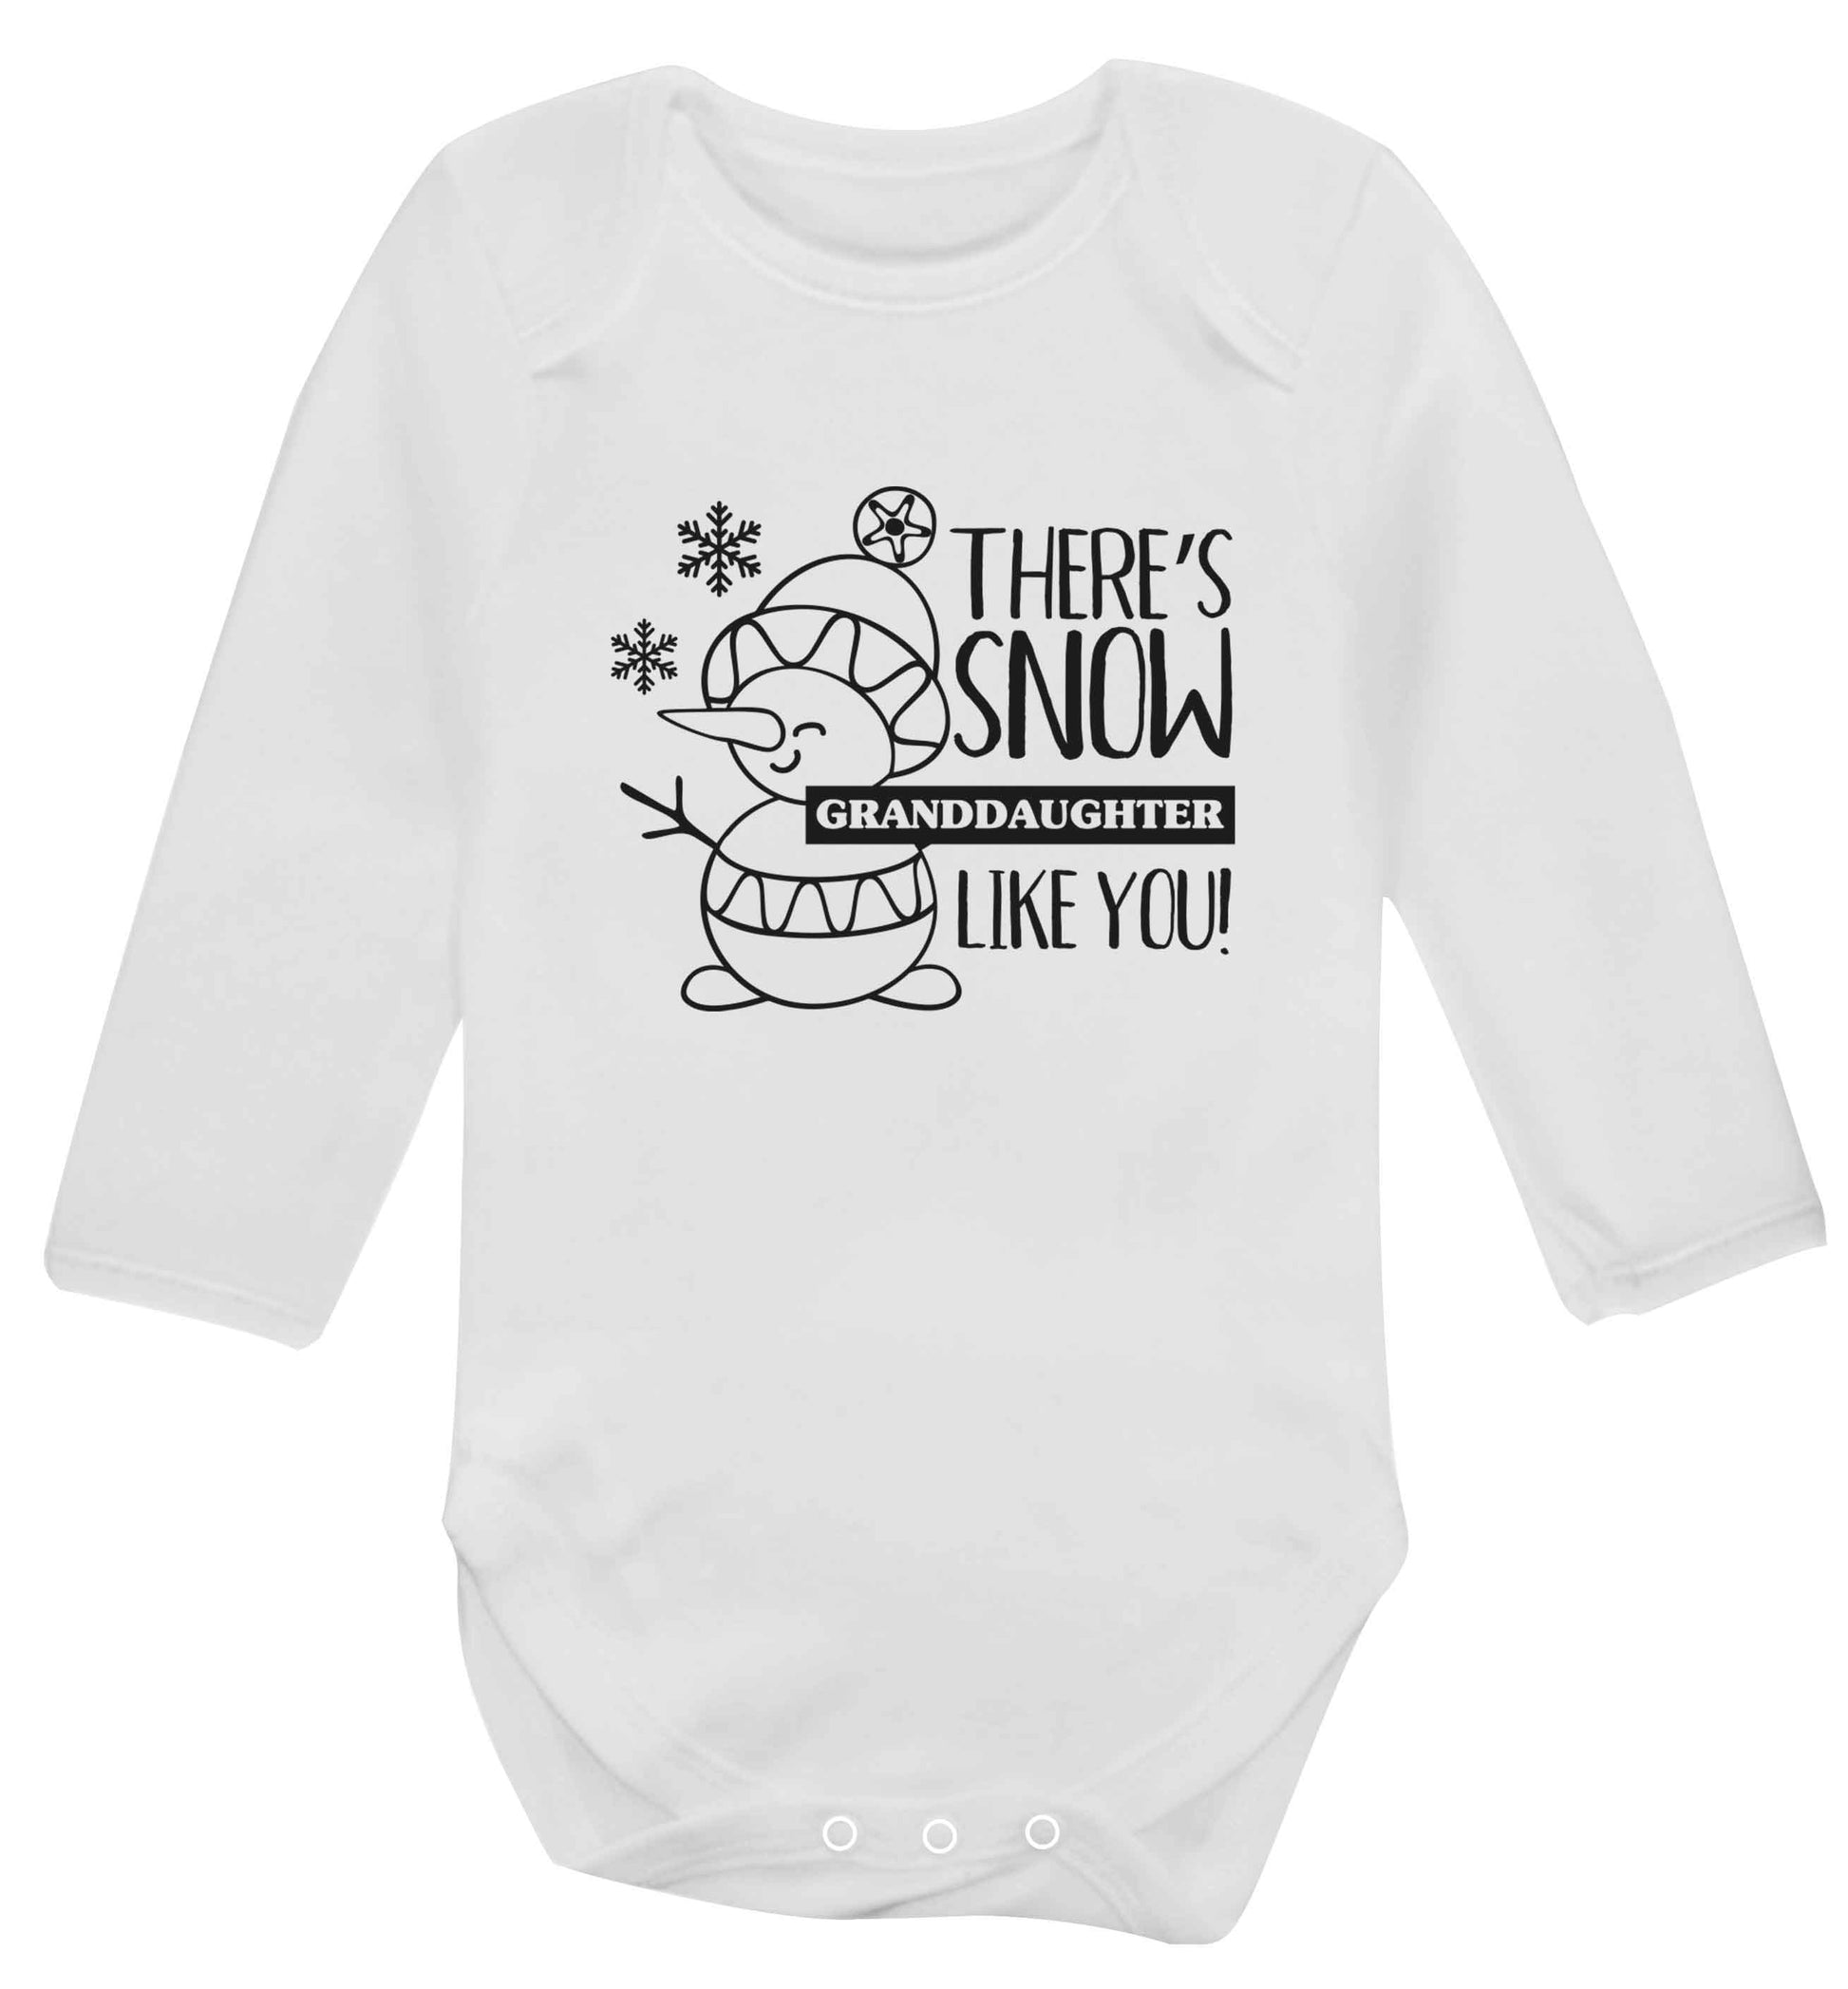 There's snow granddaughter like you baby vest long sleeved white 6-12 months